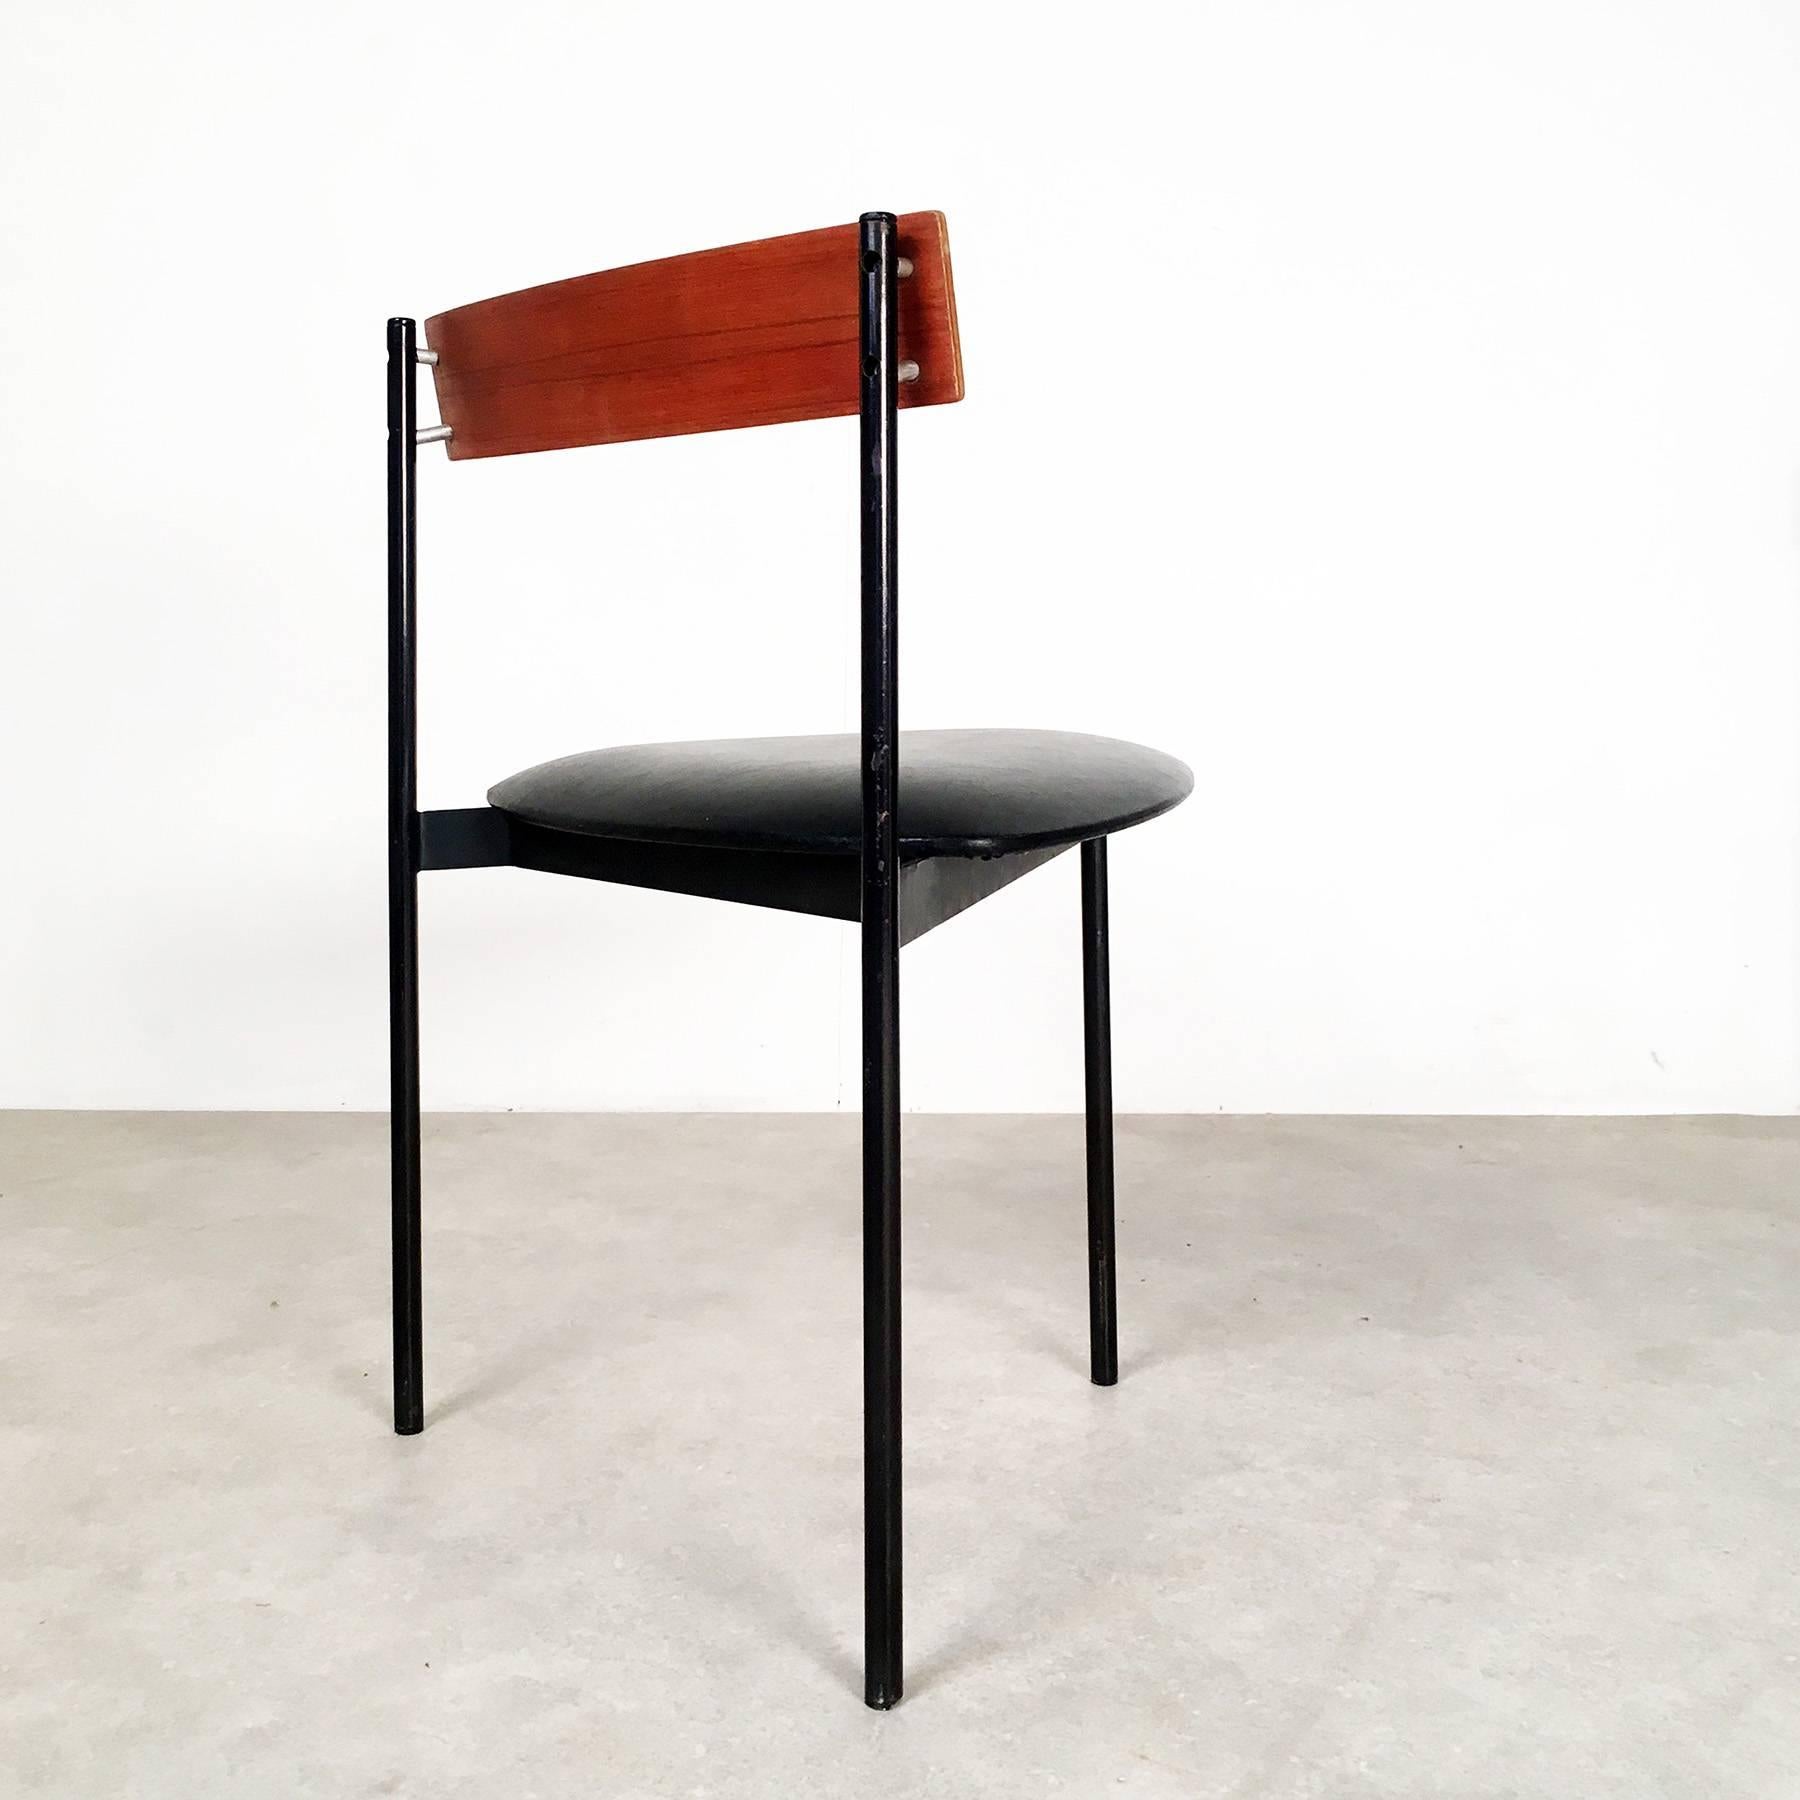 Four modernist Twen chairs, manufactured in the 1950s in Germany by Rego. Twen was a series of light weight furniture for young people - nowadays common, in the 1950s a revolutionary concept.

The chairs consist of black painted steel, teak